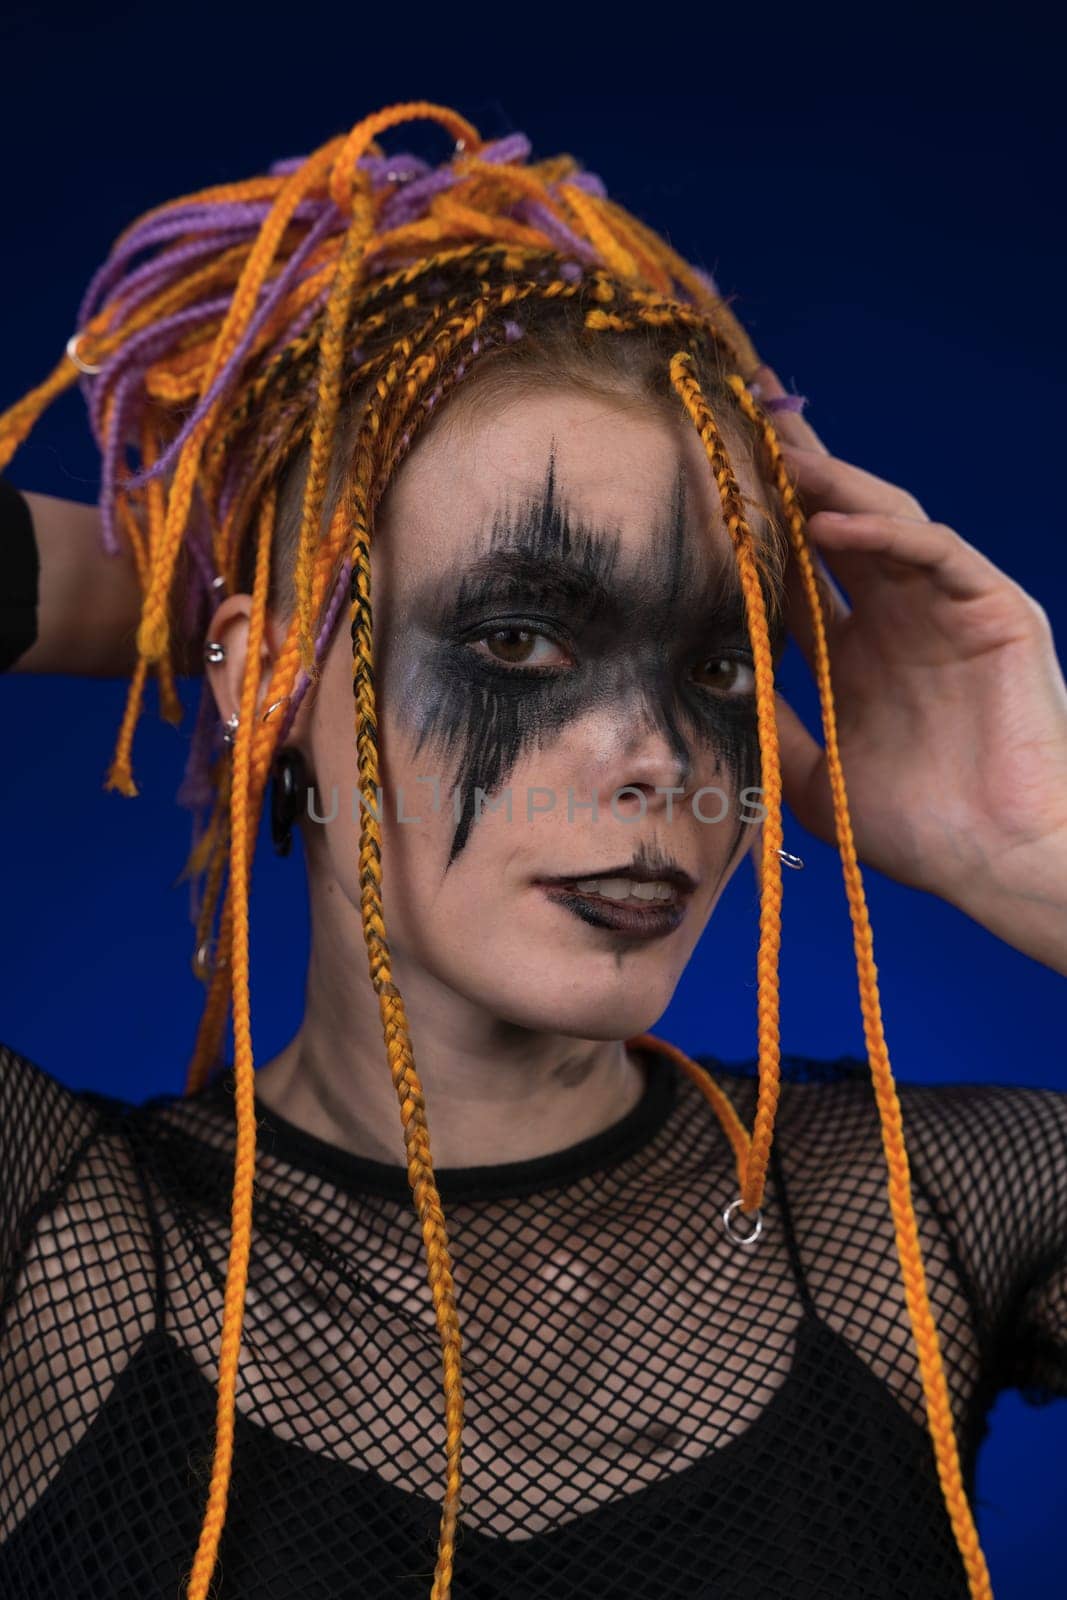 Informal young woman with colored dreadlocks hairstyle, horror black stage make up painted on face by Alexander-Piragis